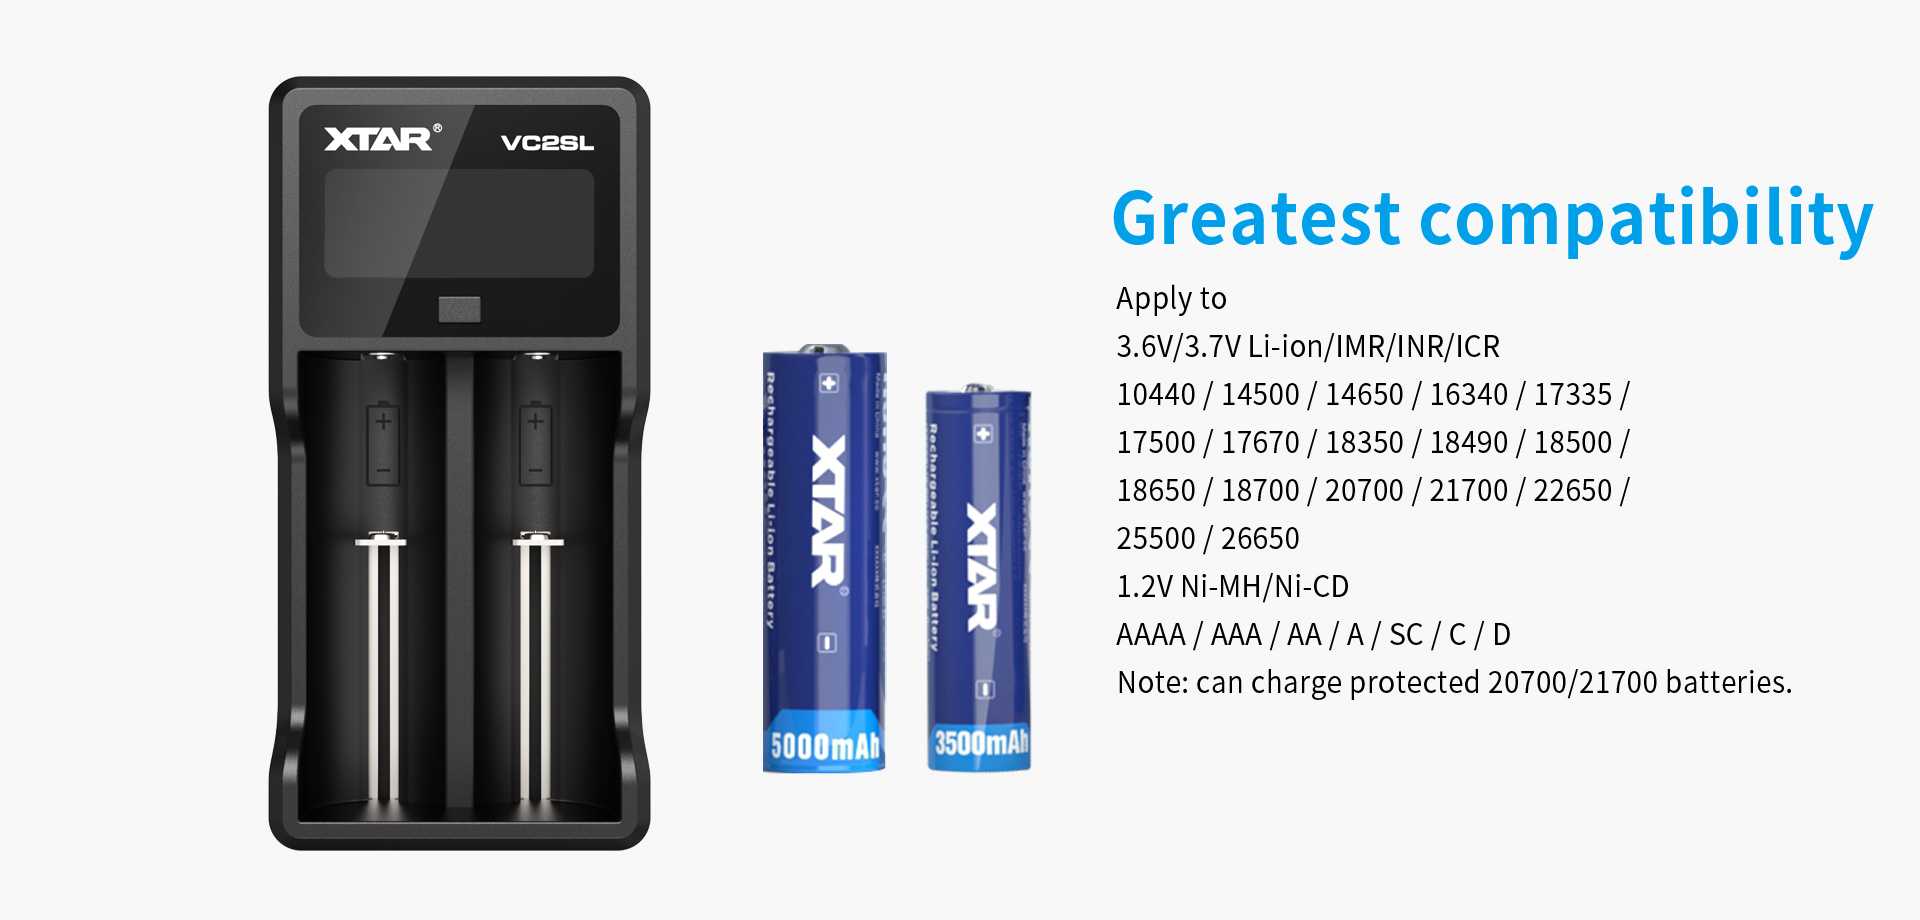 Wide compatibility of Li-ion & NiMH batteries, including the protected 21700 batteries.